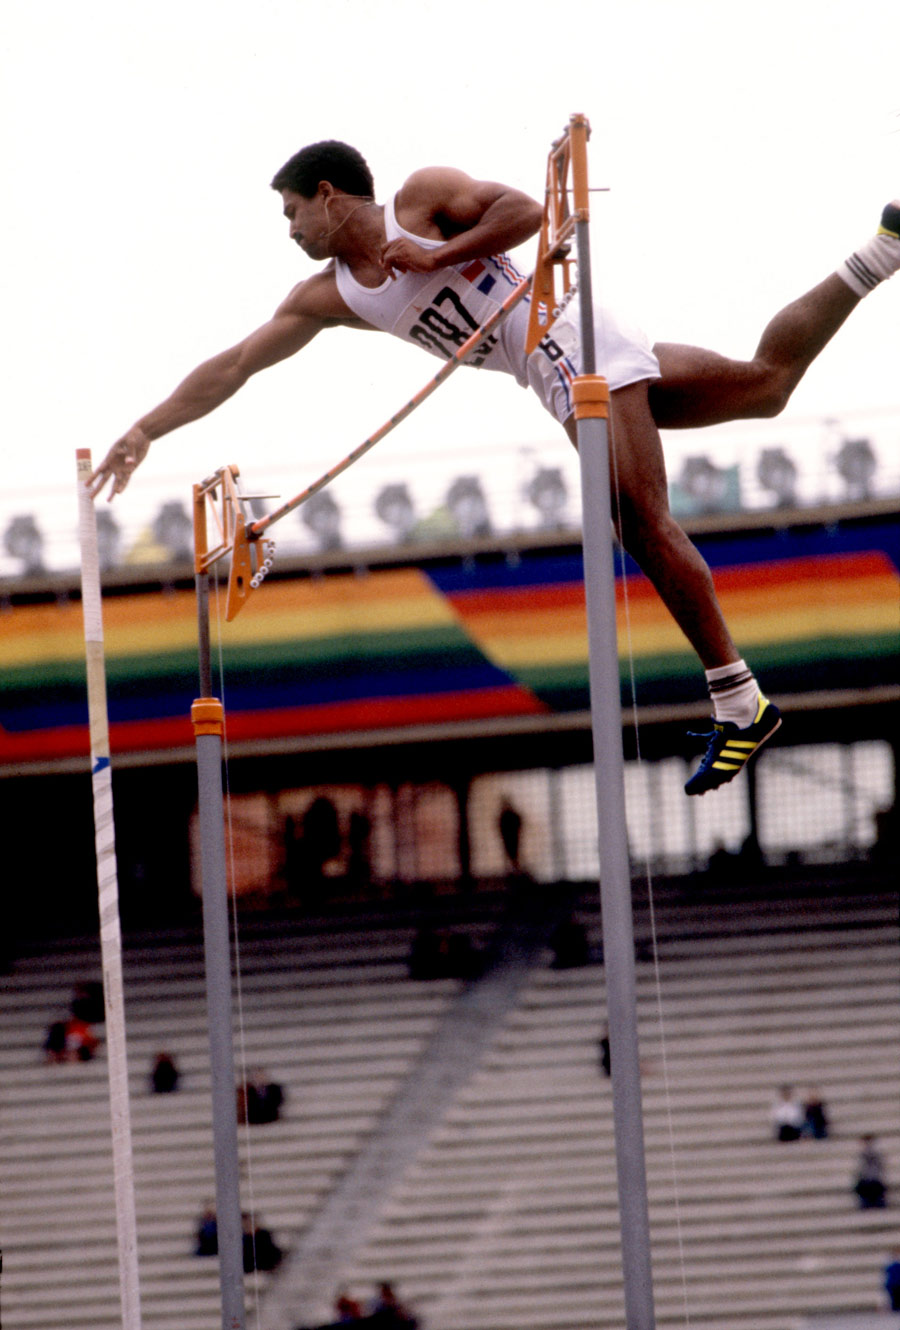 Daley Thompson's all-round class took him to gold in the decathlon